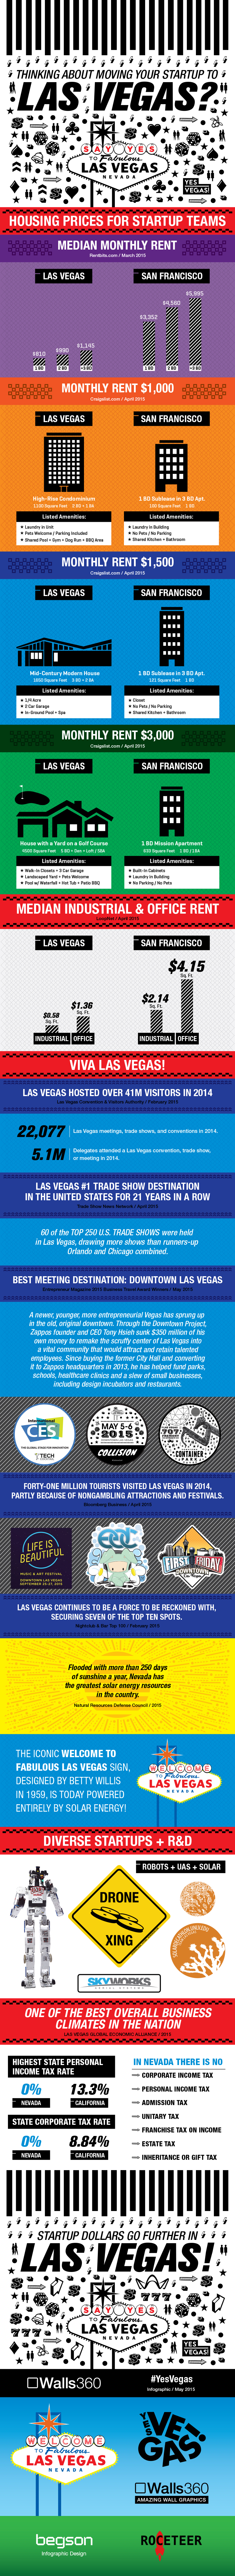 Thinking about moving your startup to Las Vegas? #YesVegas Infographic